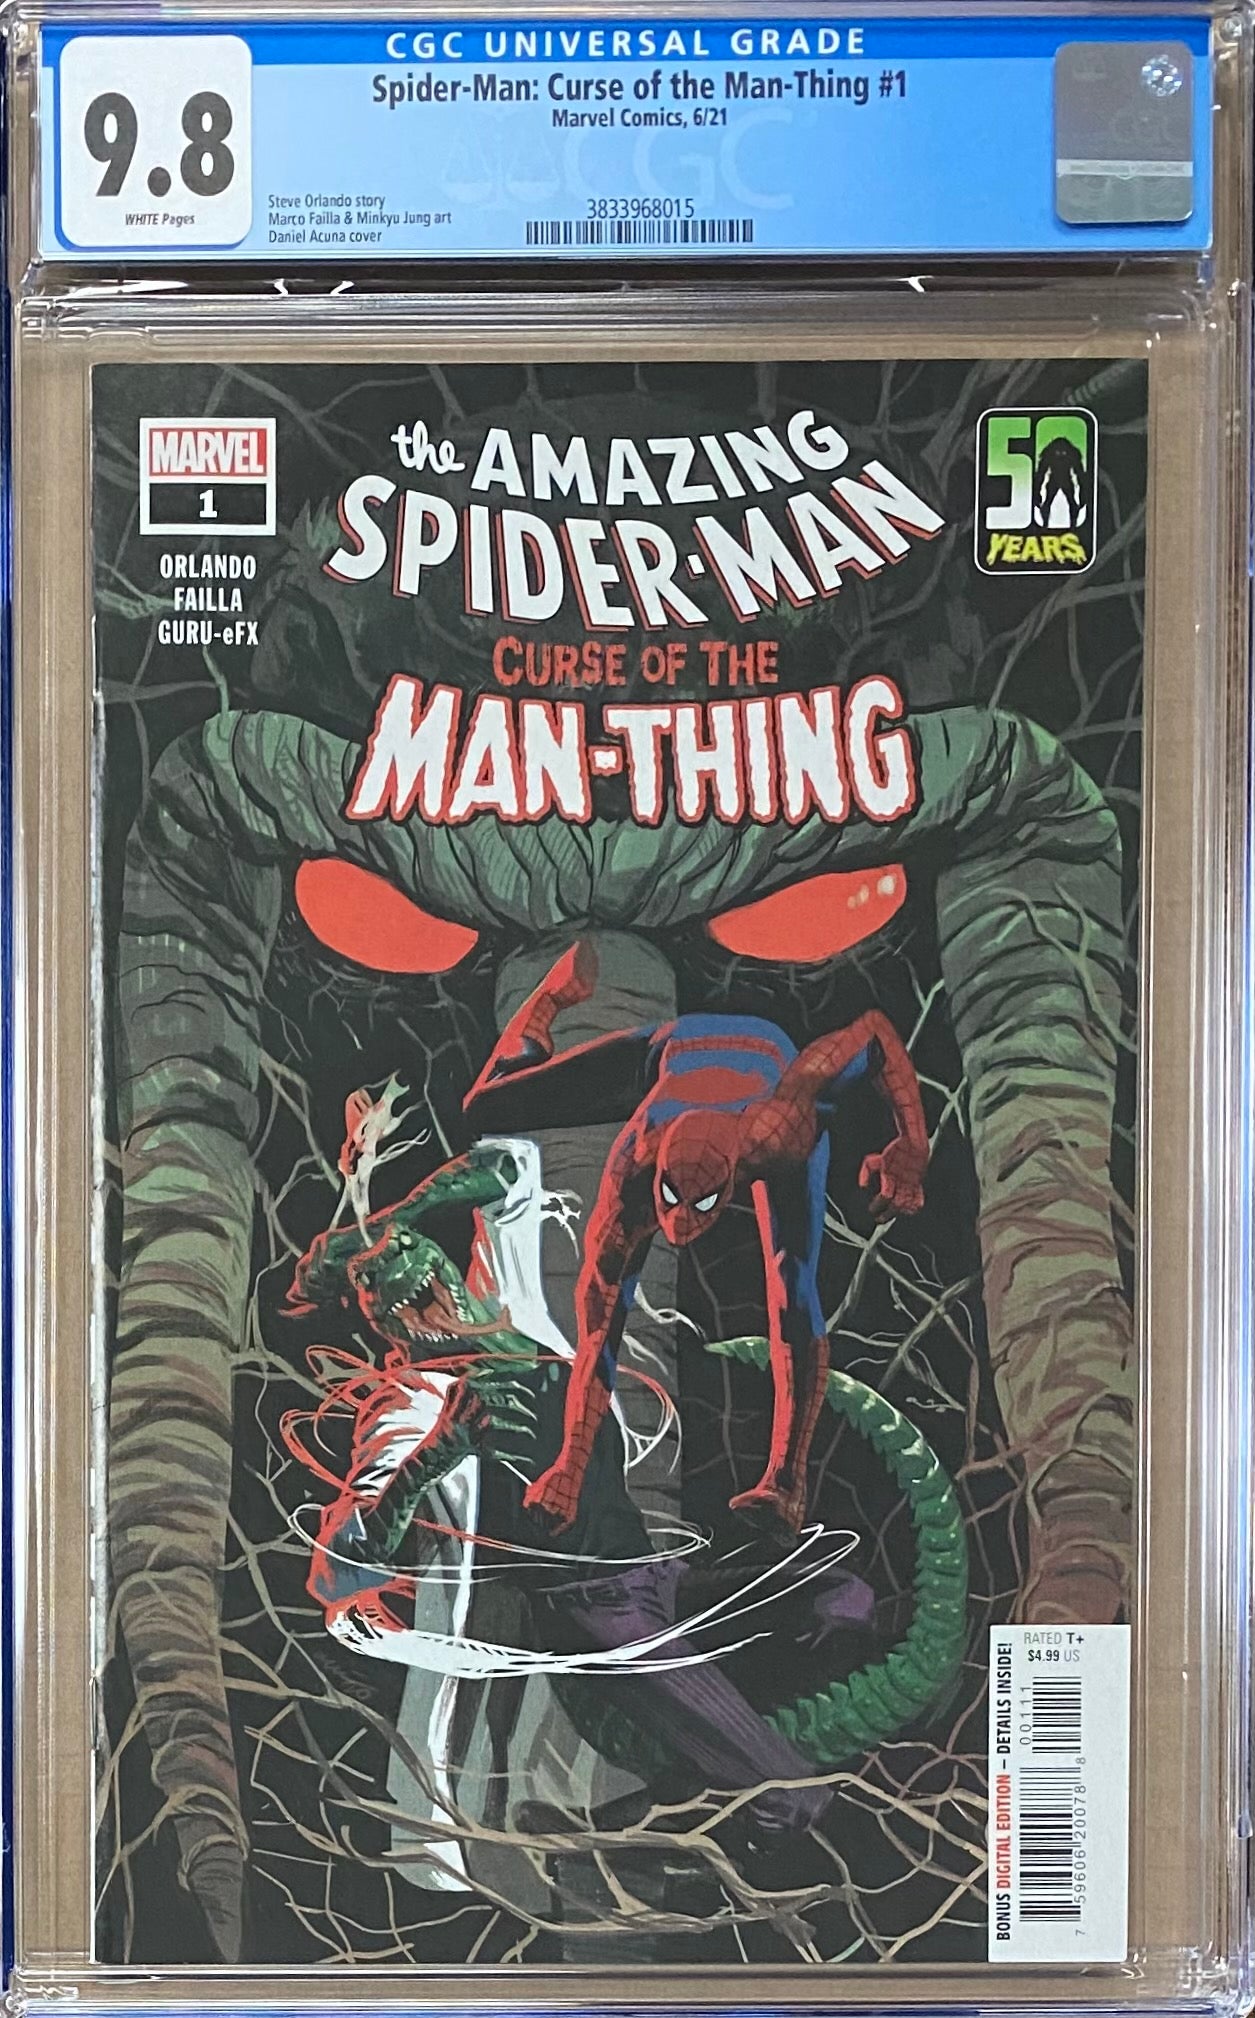 Spider-Man: Curse of the Man-Thing #1 CGC 9.8